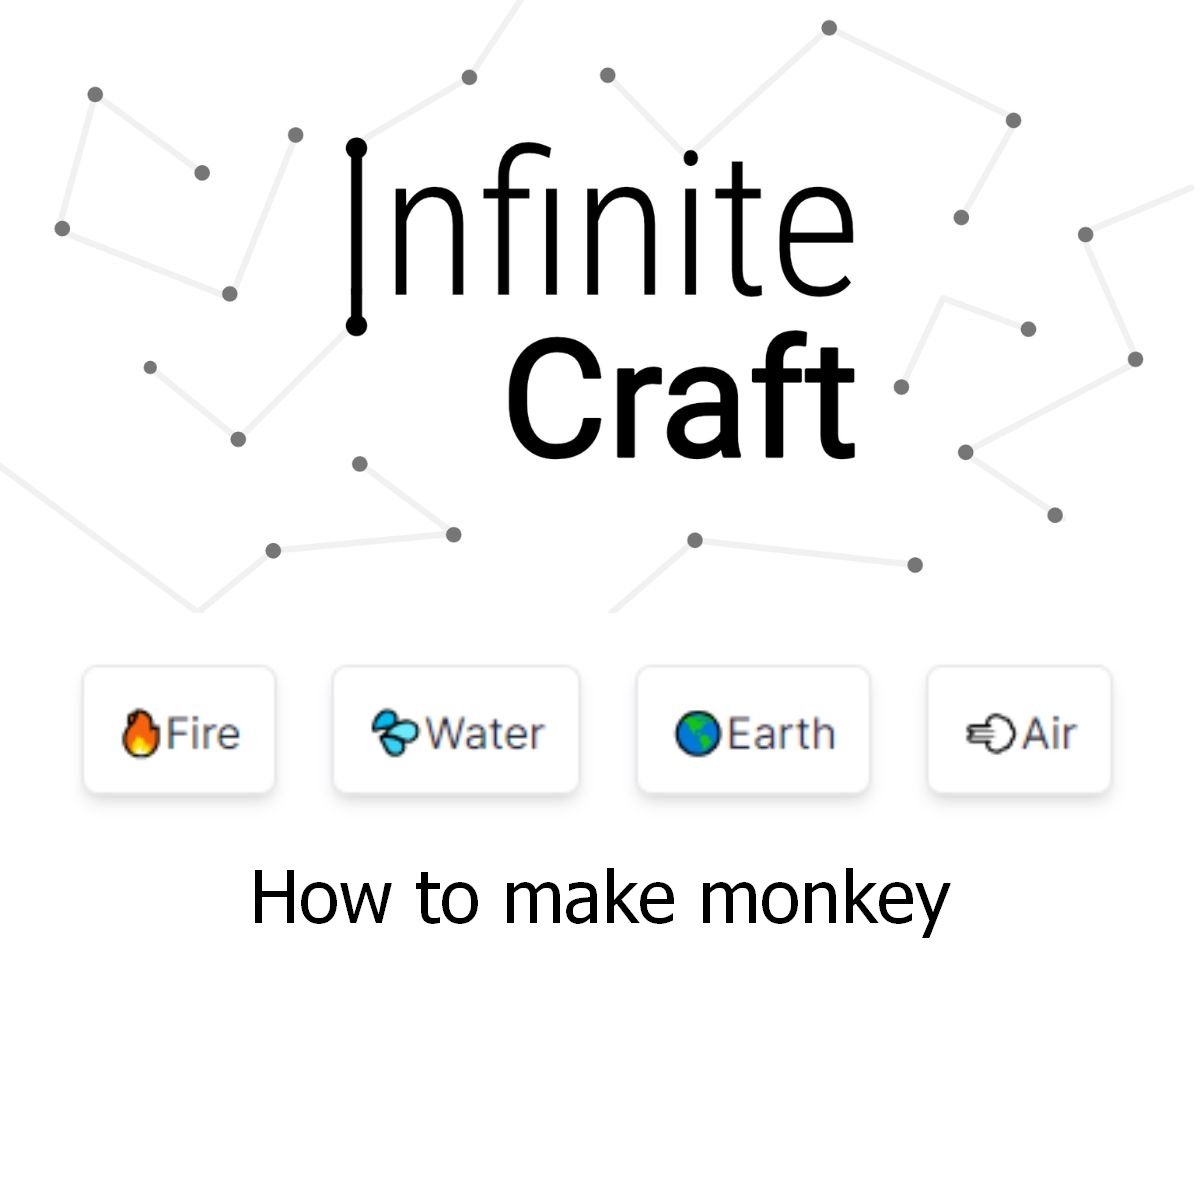 how to make monkey in infinite craft